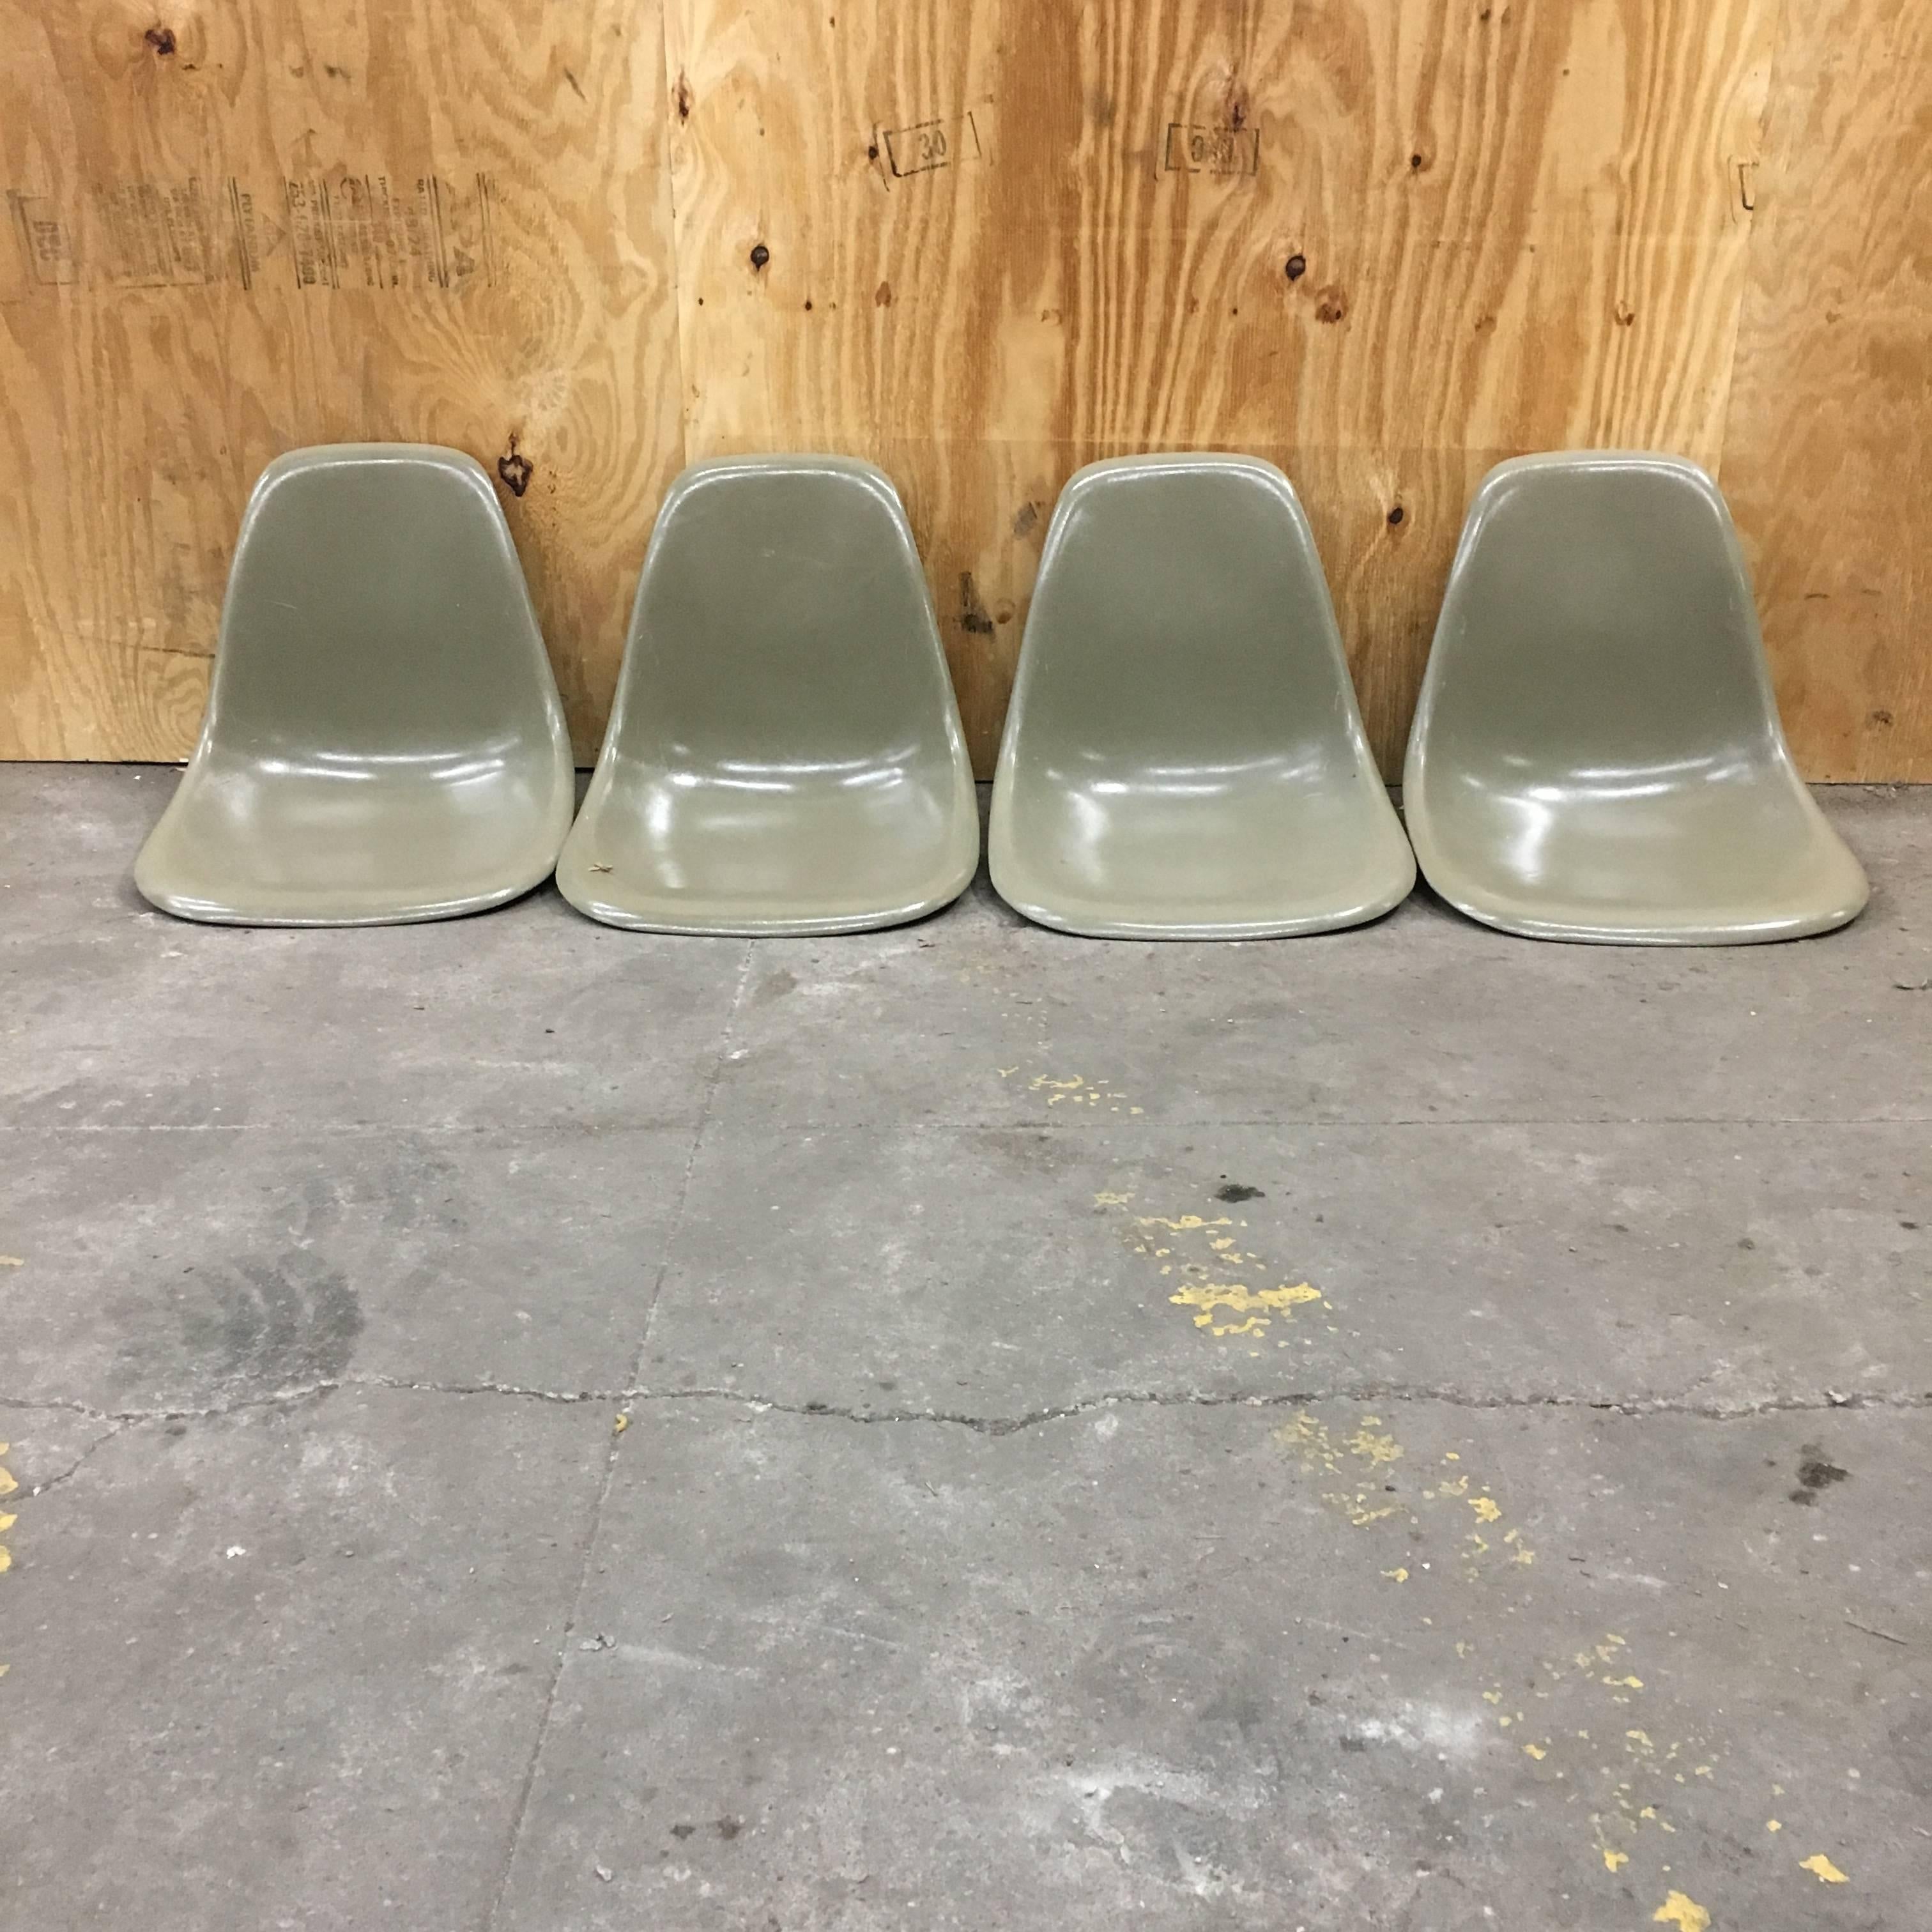 Set of eight Herman Miller Eames dining chairs in raw umber a very rare color. All shells in excellent original condition. Chairs come with free black standard bases. Other available bases include Eiffel and dowel. Up to 12 chairs available.